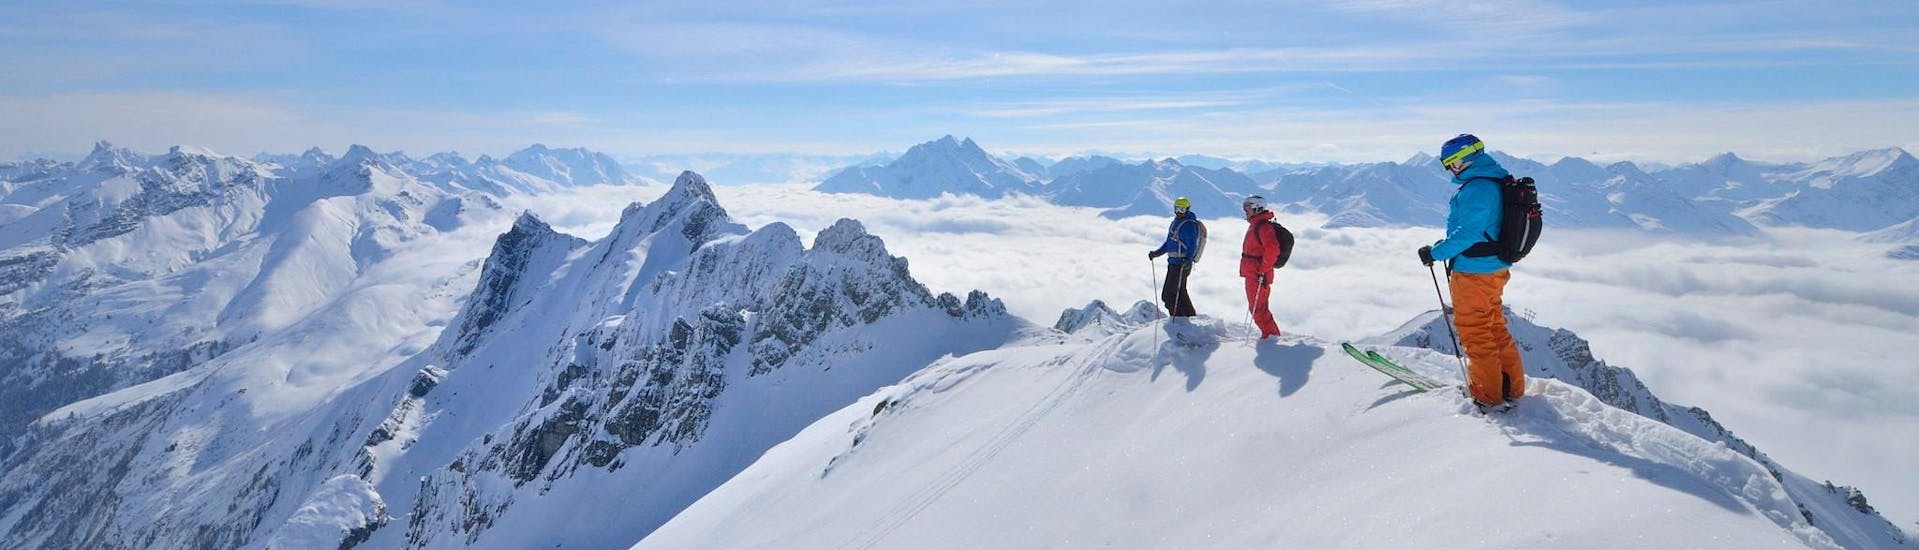 Three skiers stood on the top of a mountain, overlooking a snow-covered Alpine panorama as they prepare for an Avalanche Training, LVS Introduction session with Freeride Hotspot.